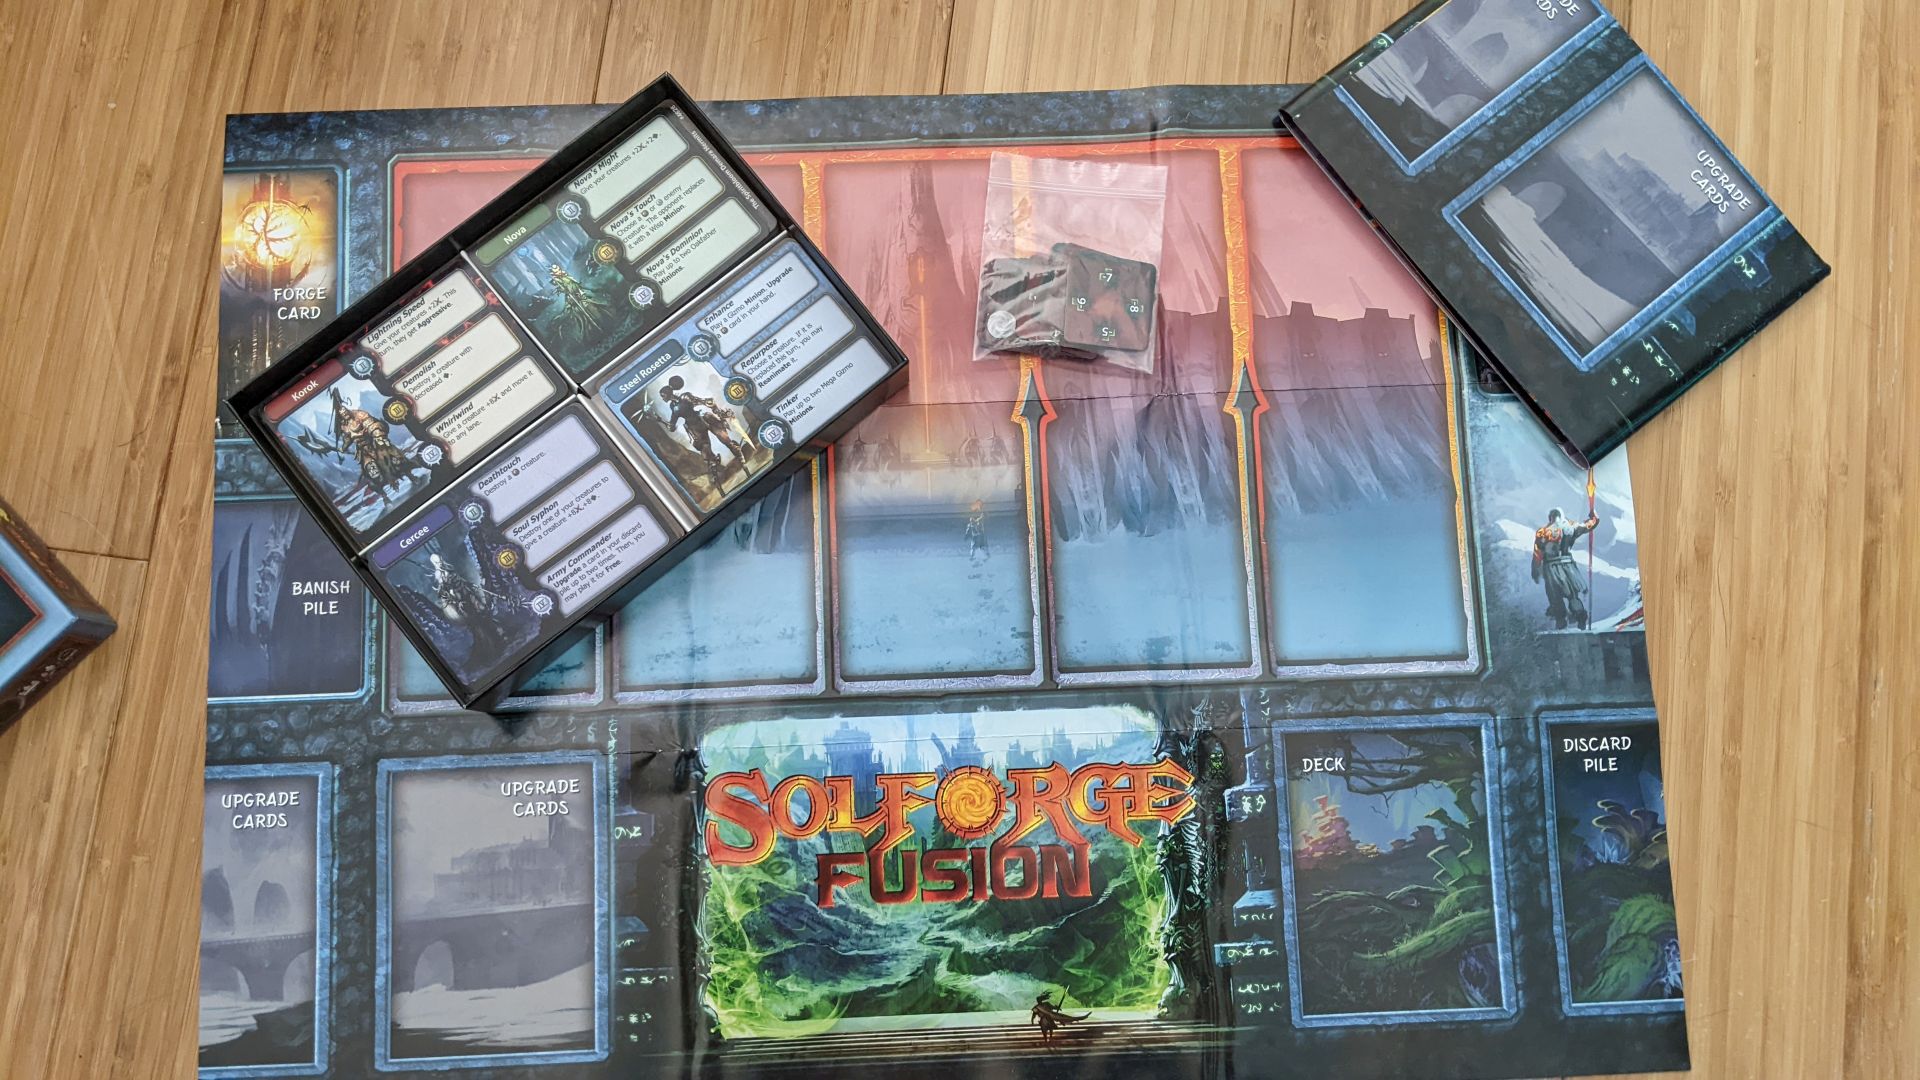 The contents of the SolForge Fusion box